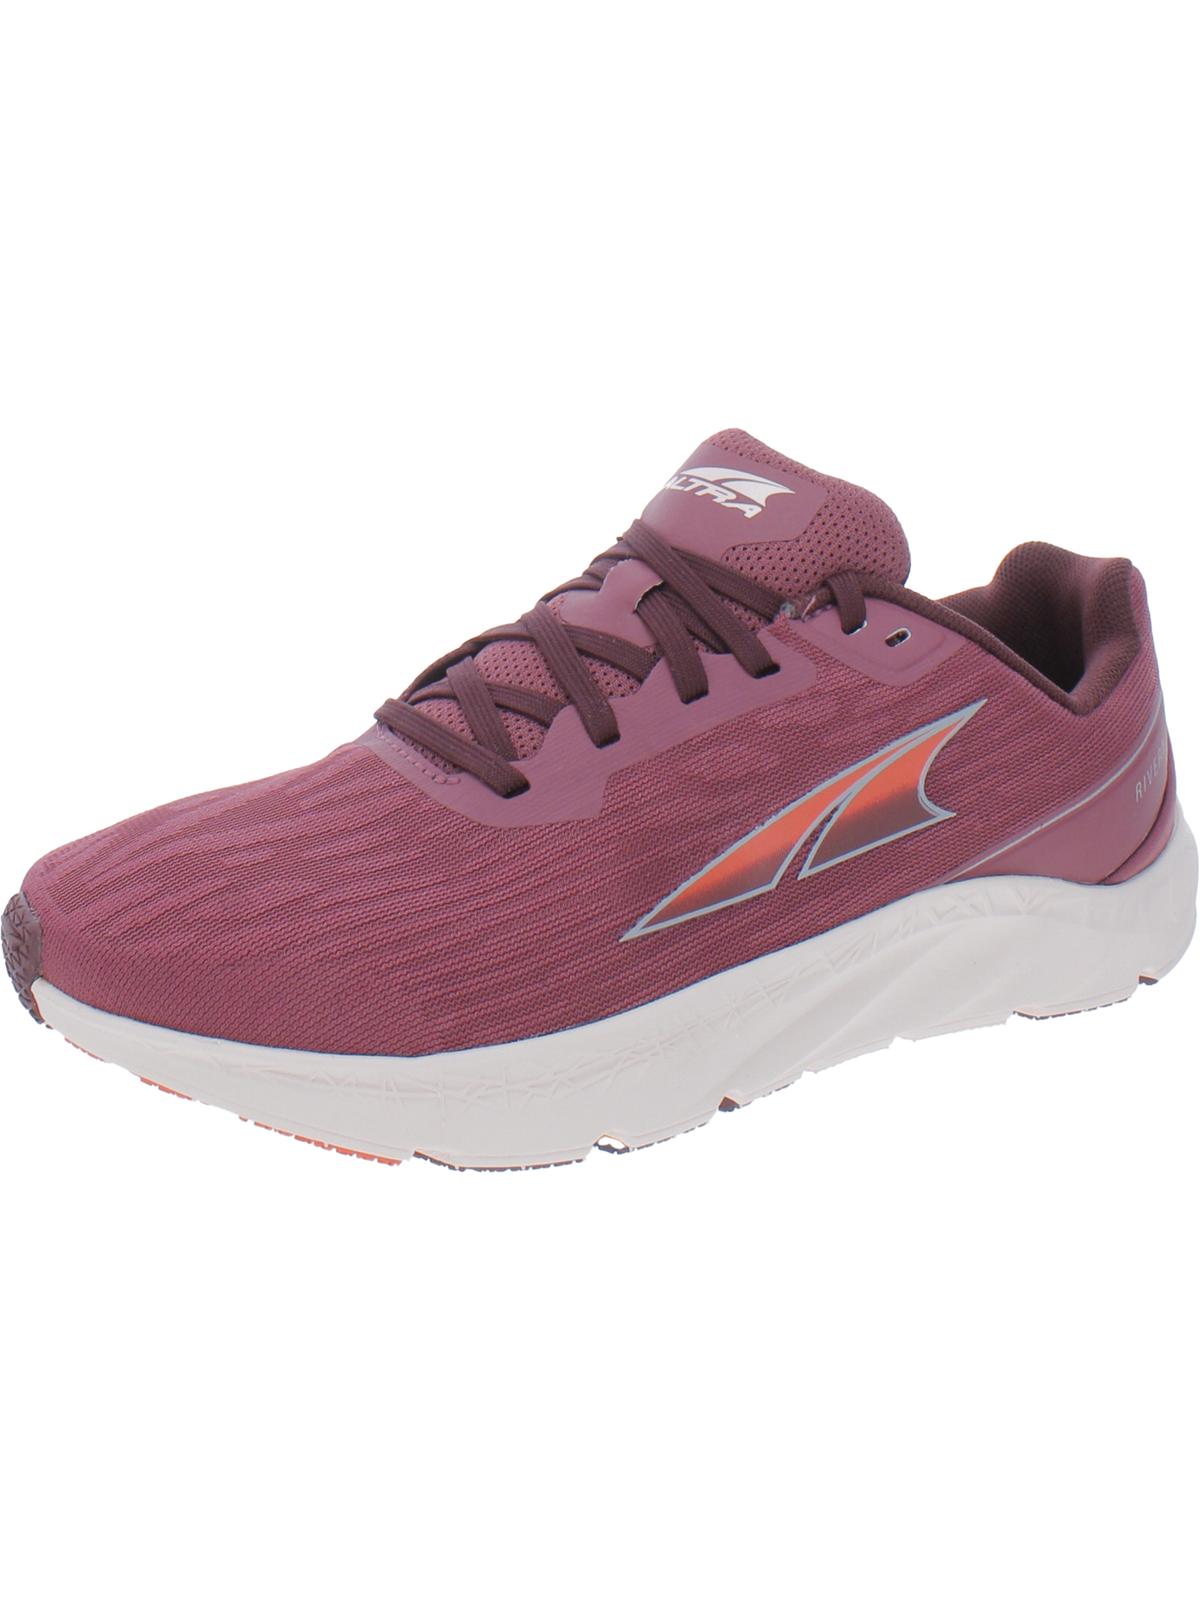 ALTRA Rivera Womens Faux Leather Athletic Running Shoes